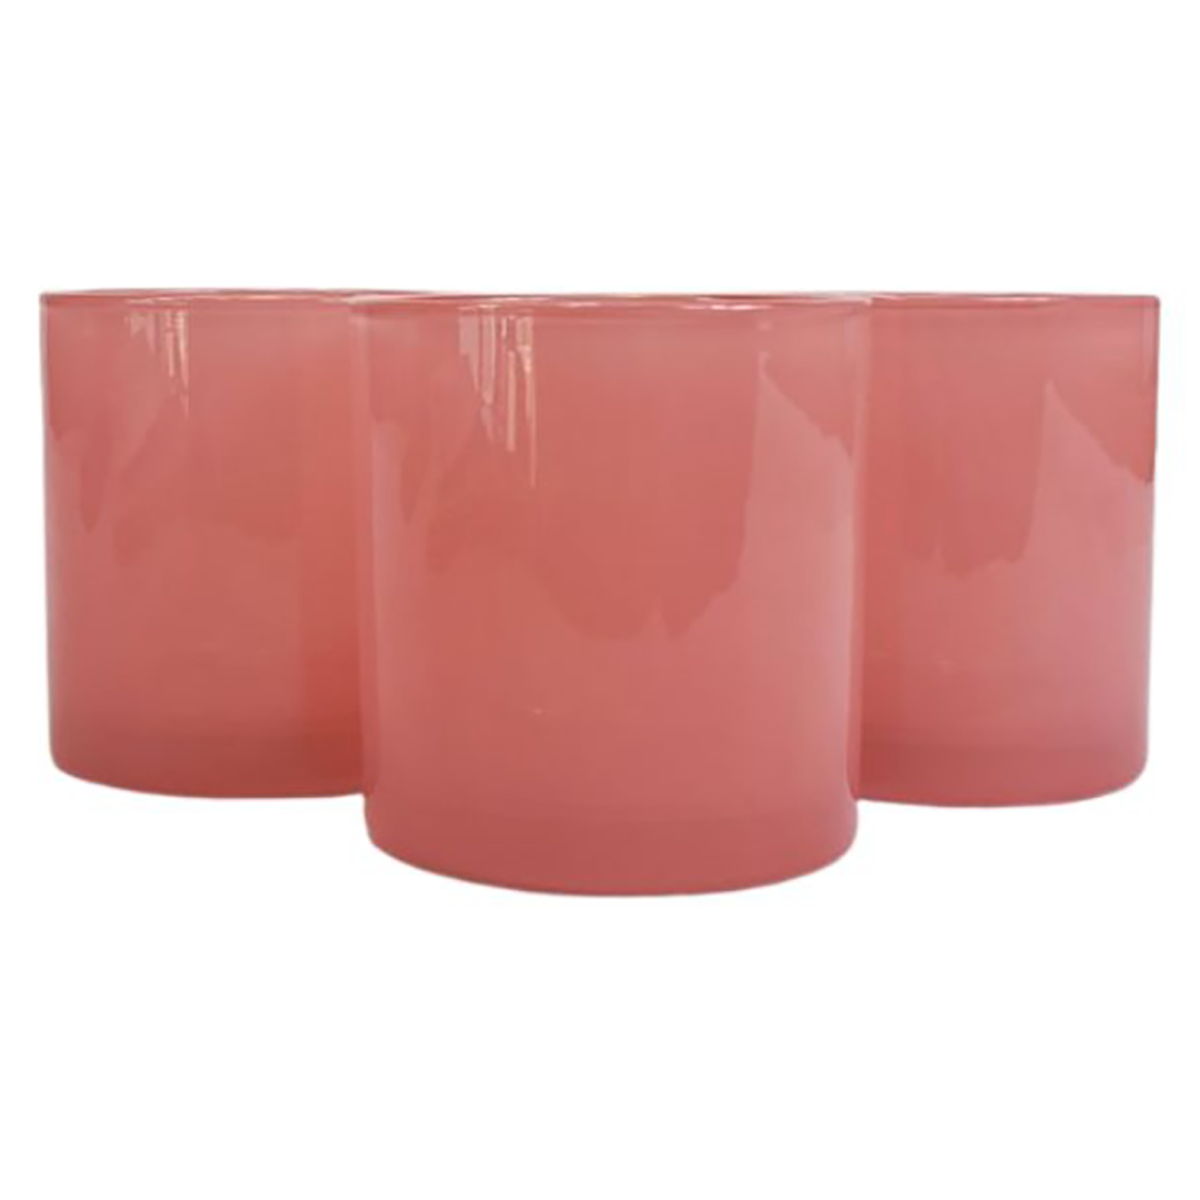 Monticiano candle vessel Ballerina Pink Side by Side